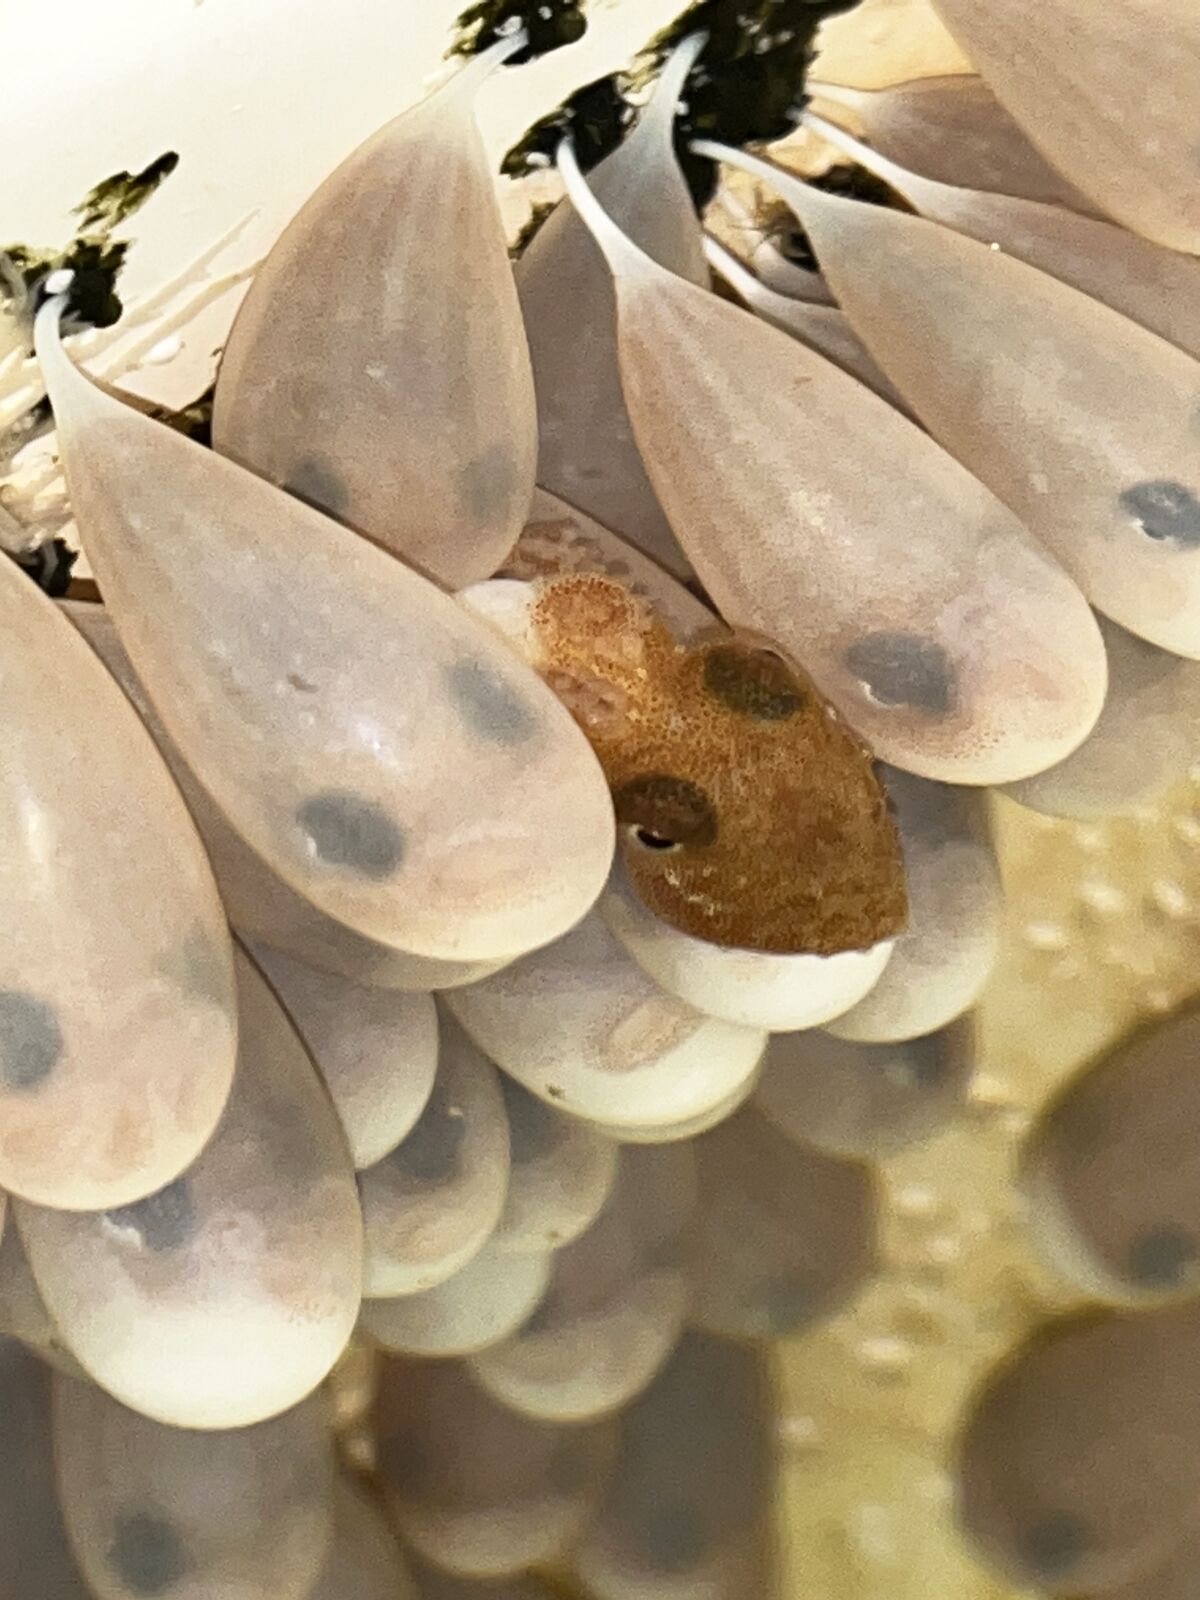 An octopus hatchling sits among other fertilized eggs at the Scripps Institution of Oceanography in La Jolla.